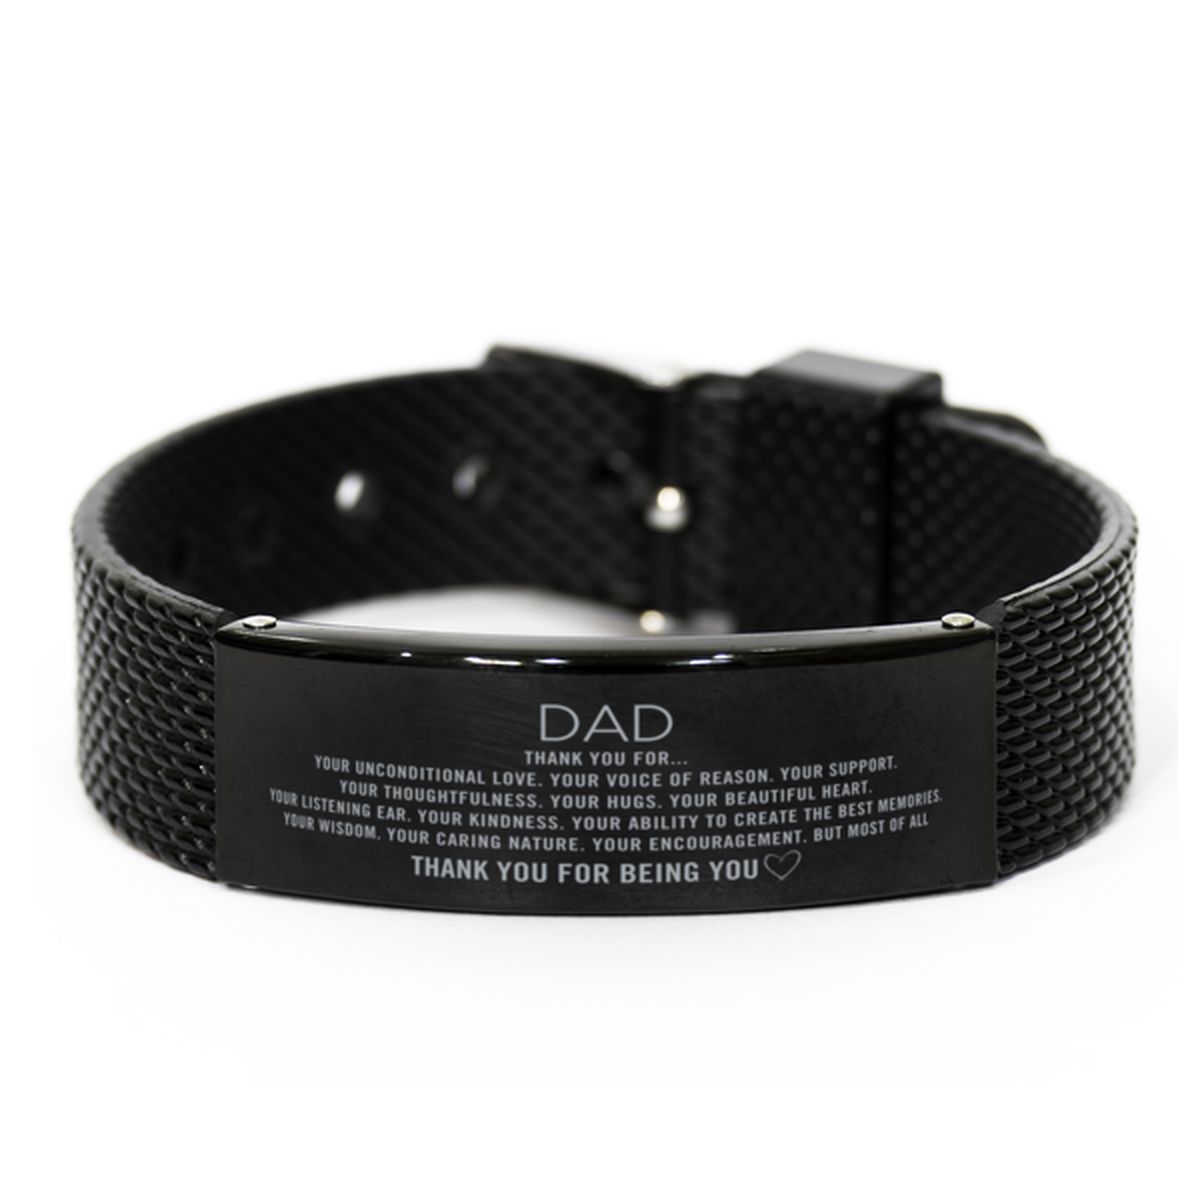 Dad Black Shark Mesh Bracelet Custom, Engraved Gifts For Dad Christmas Graduation Birthday Gifts for Men Women Dad Thank you for Your unconditional love